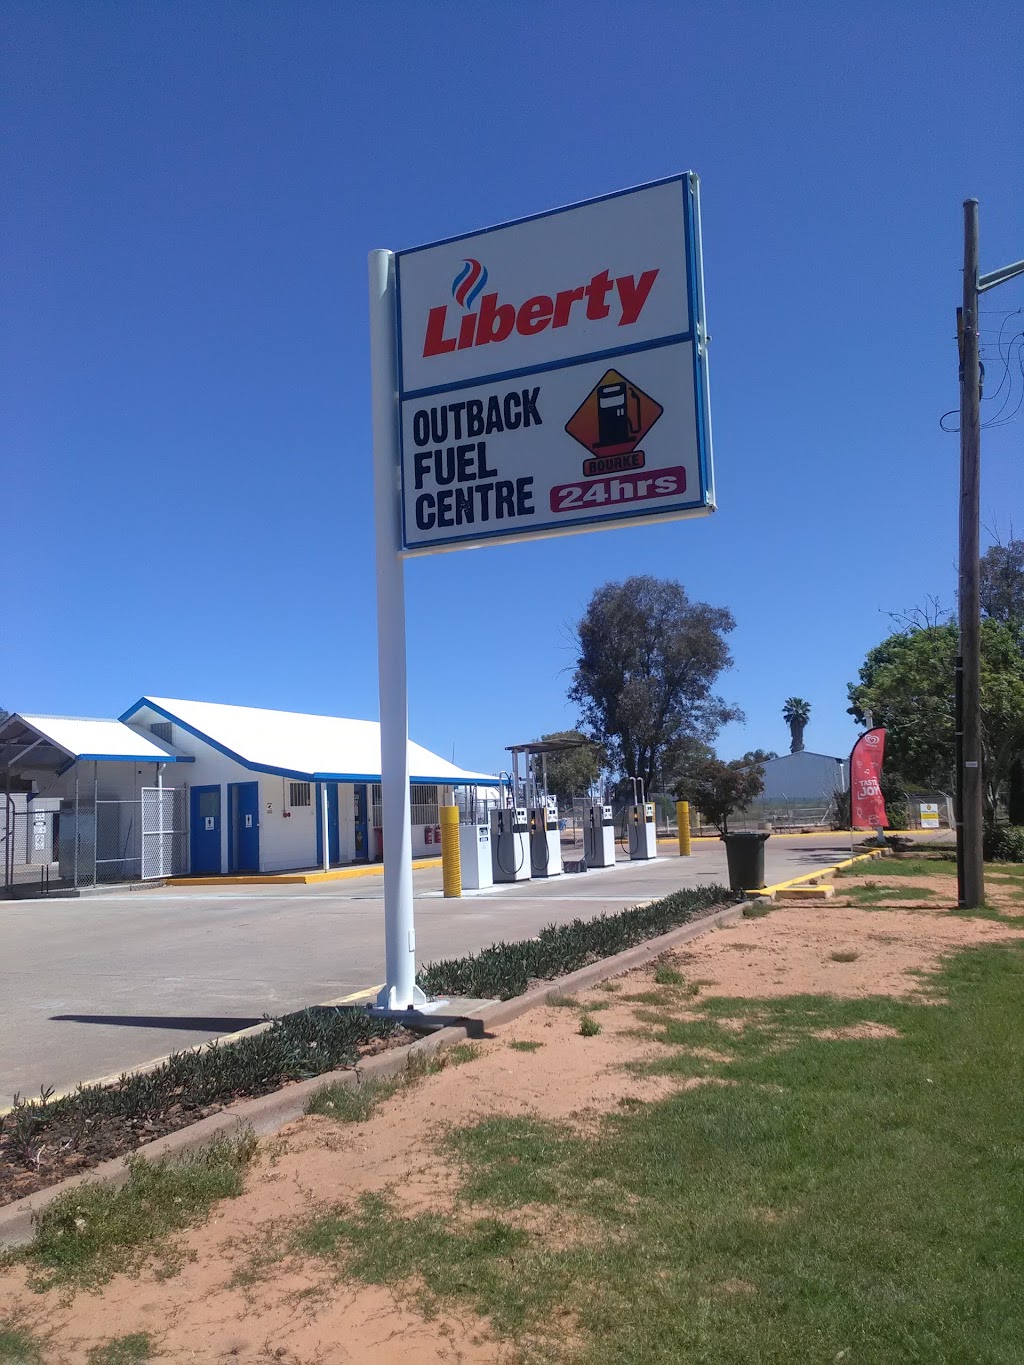 Outback Fuel Centre | gas station | 96 Anson St, Bourke NSW 2840, Australia | 0268721250 OR +61 2 6872 1250